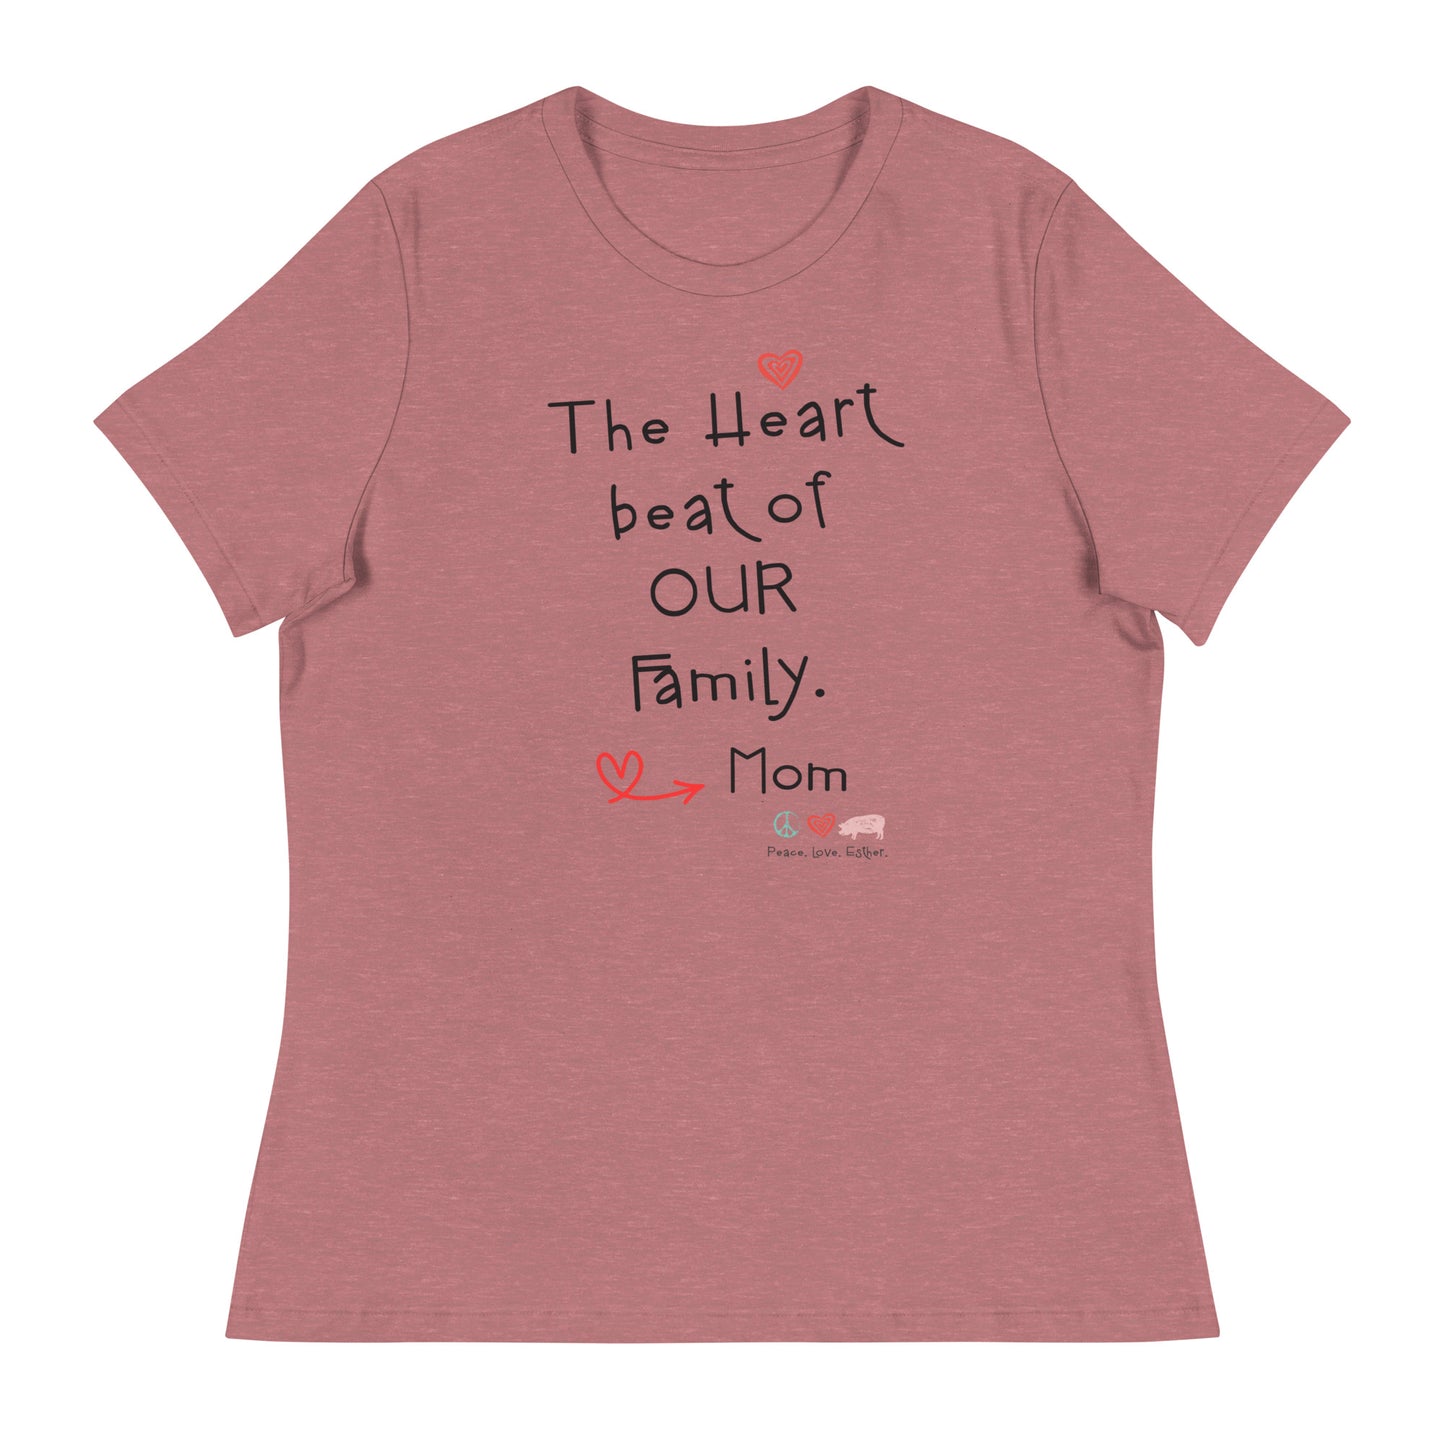 NEW-" The Heart Beat of our family " Women's Relaxed T-Shirt - Mother's Day.